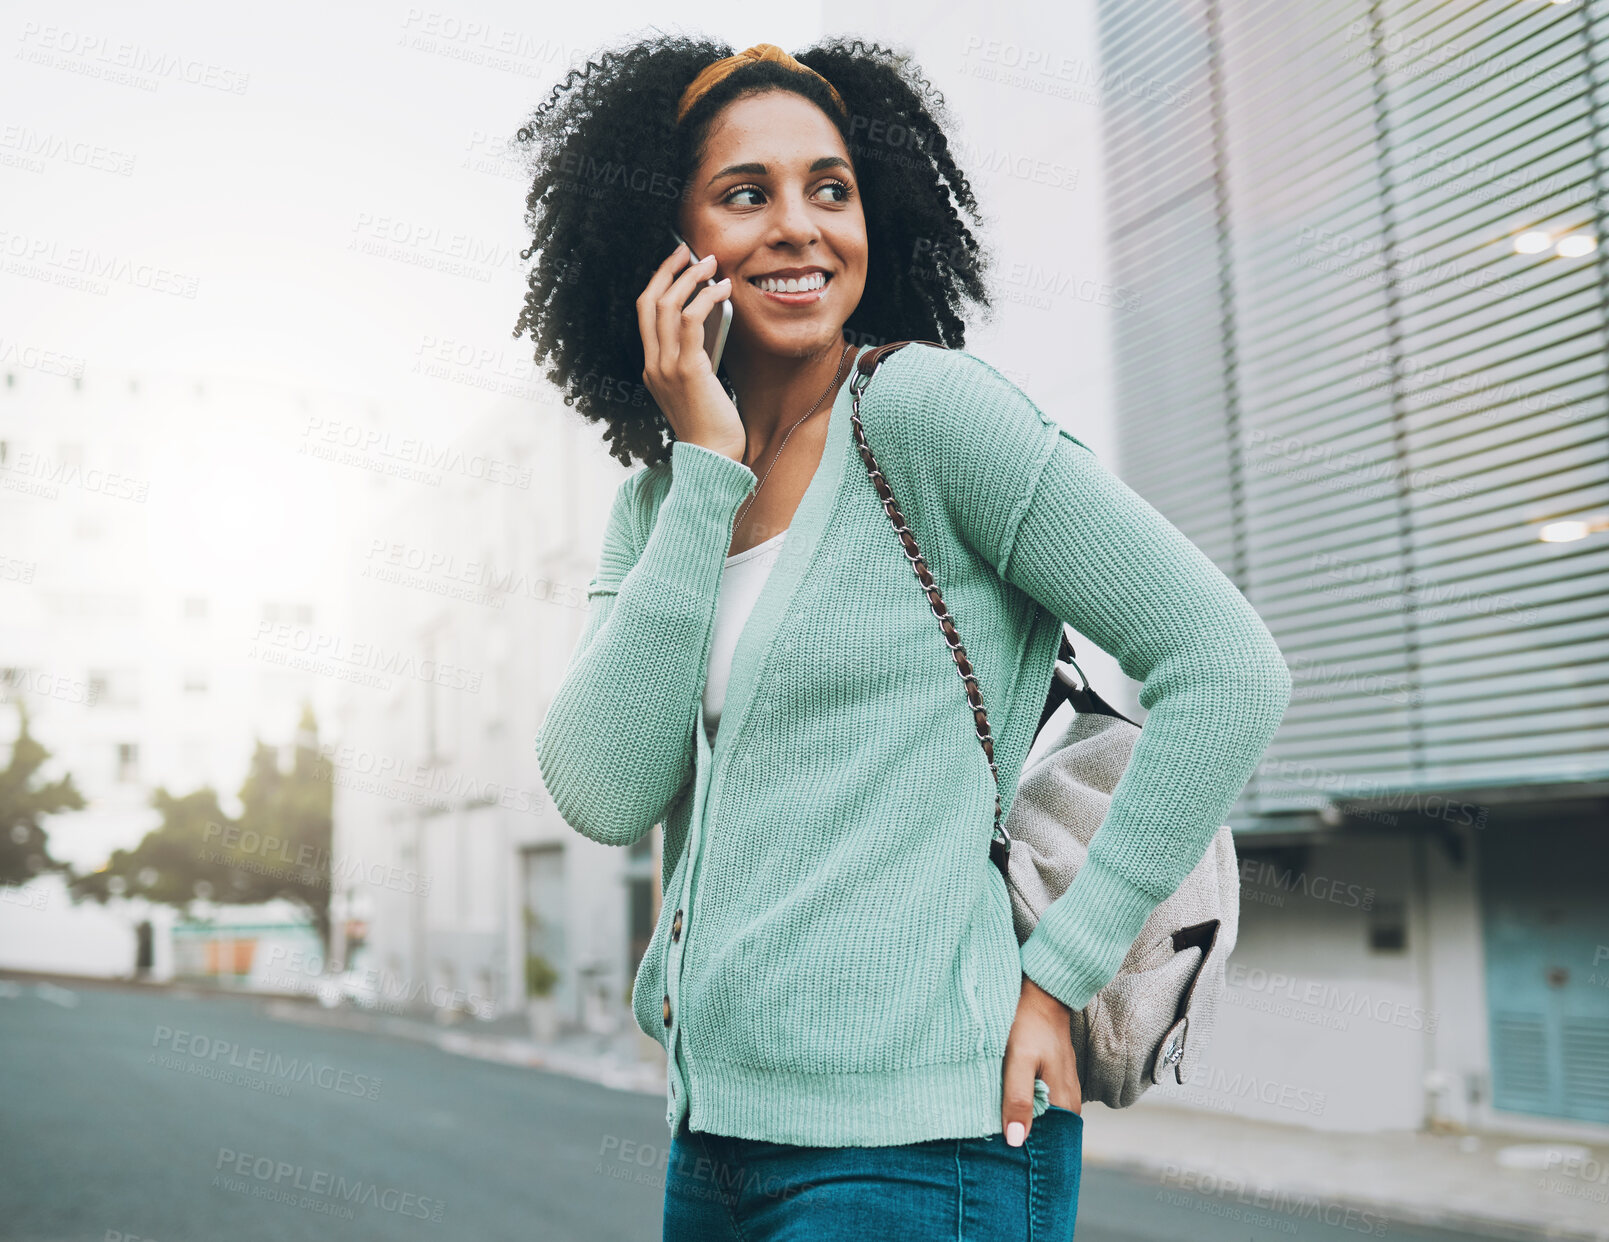 Buy stock photo Backpack, phone call and student in city street walking to university, listening to results or feedback on internship opportunity. Happy black woman with smartphone call talking outdoor in urban road